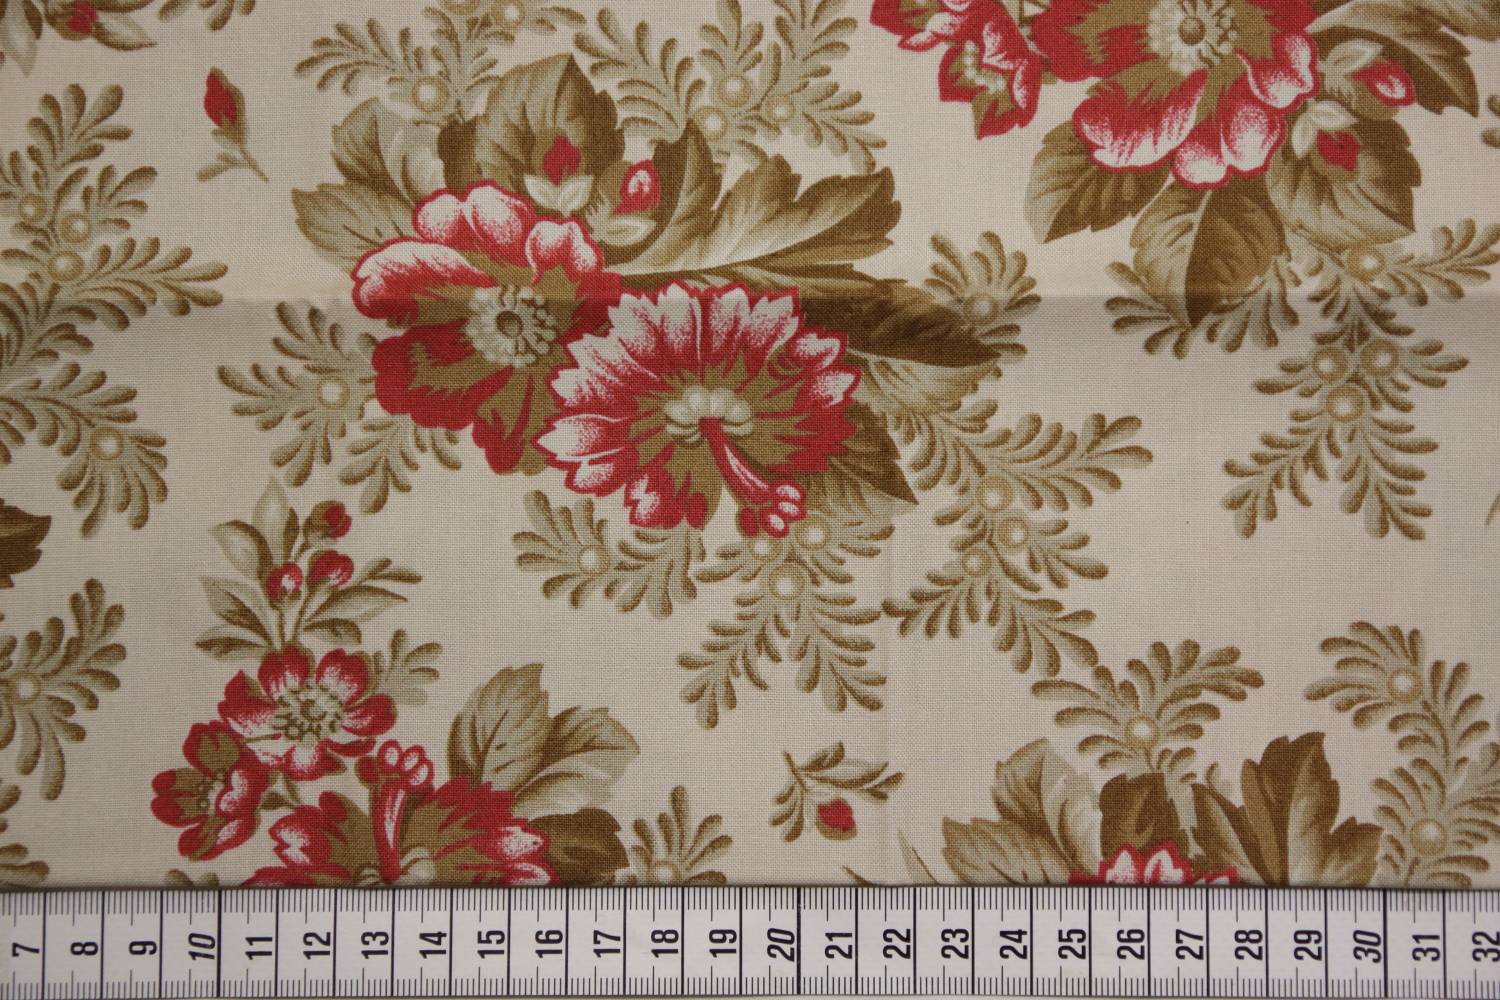 quiltstof-taupe-bloemen in rood, taupe e